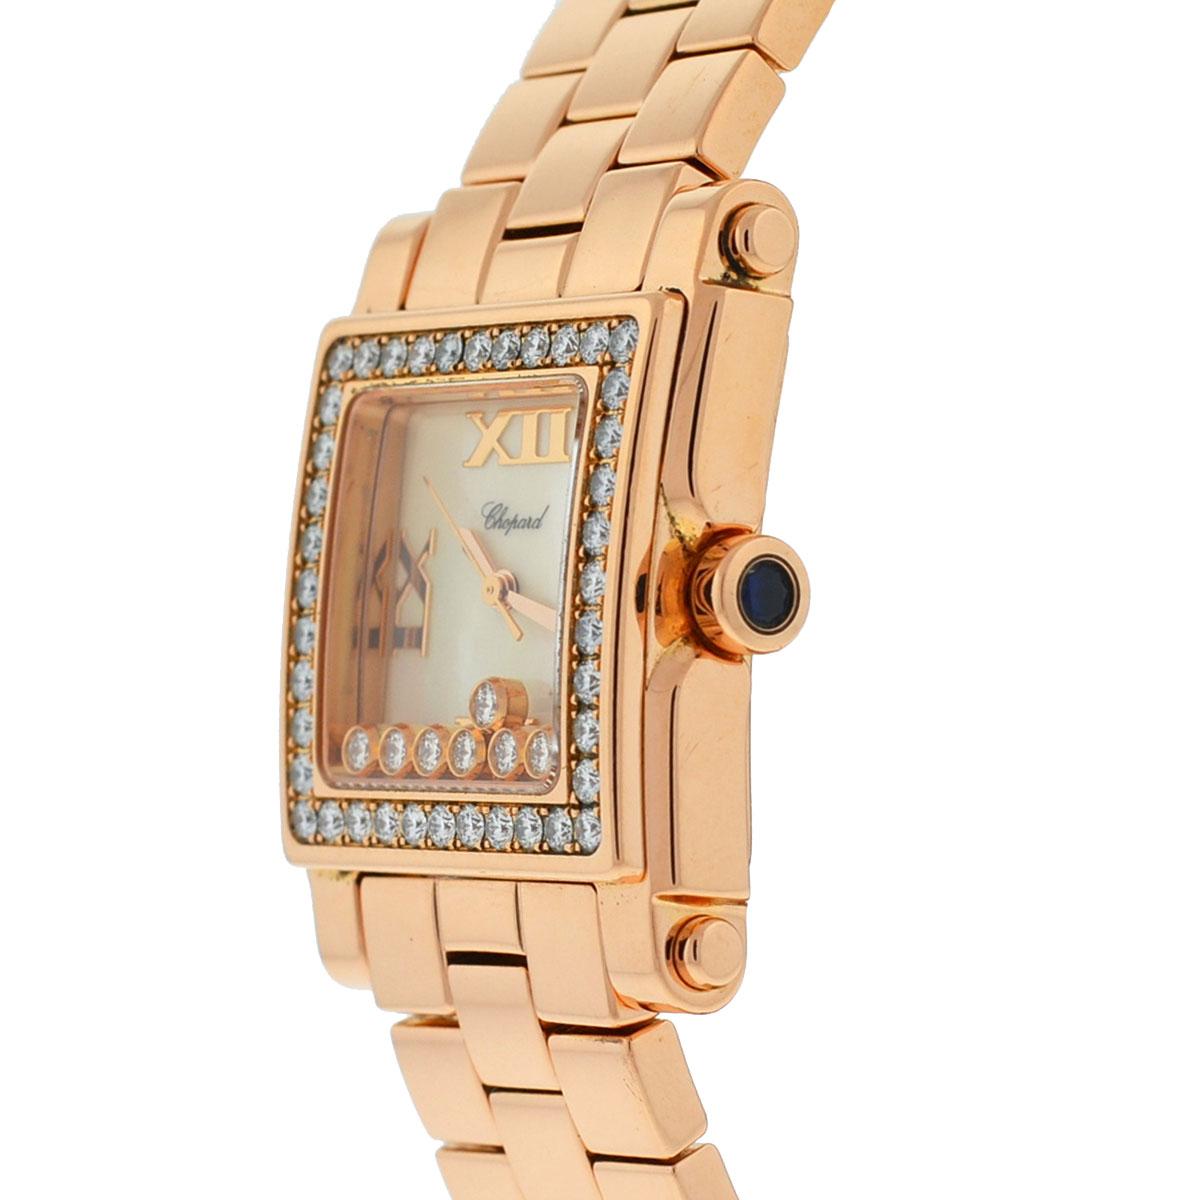 Company-Chopard
Style-Luxury Watch
Model-Happy Sport
Reference Number-275322-1376027
Case Metal-18k Rose Gold
Case Measurement-24mm x 30mm
Bracelet-18k Rose Gold
Dial-MOP Dial with 7 Floating Diamonds
Bezel-18k Rose Gold 
Crystal-Scratch Resistant